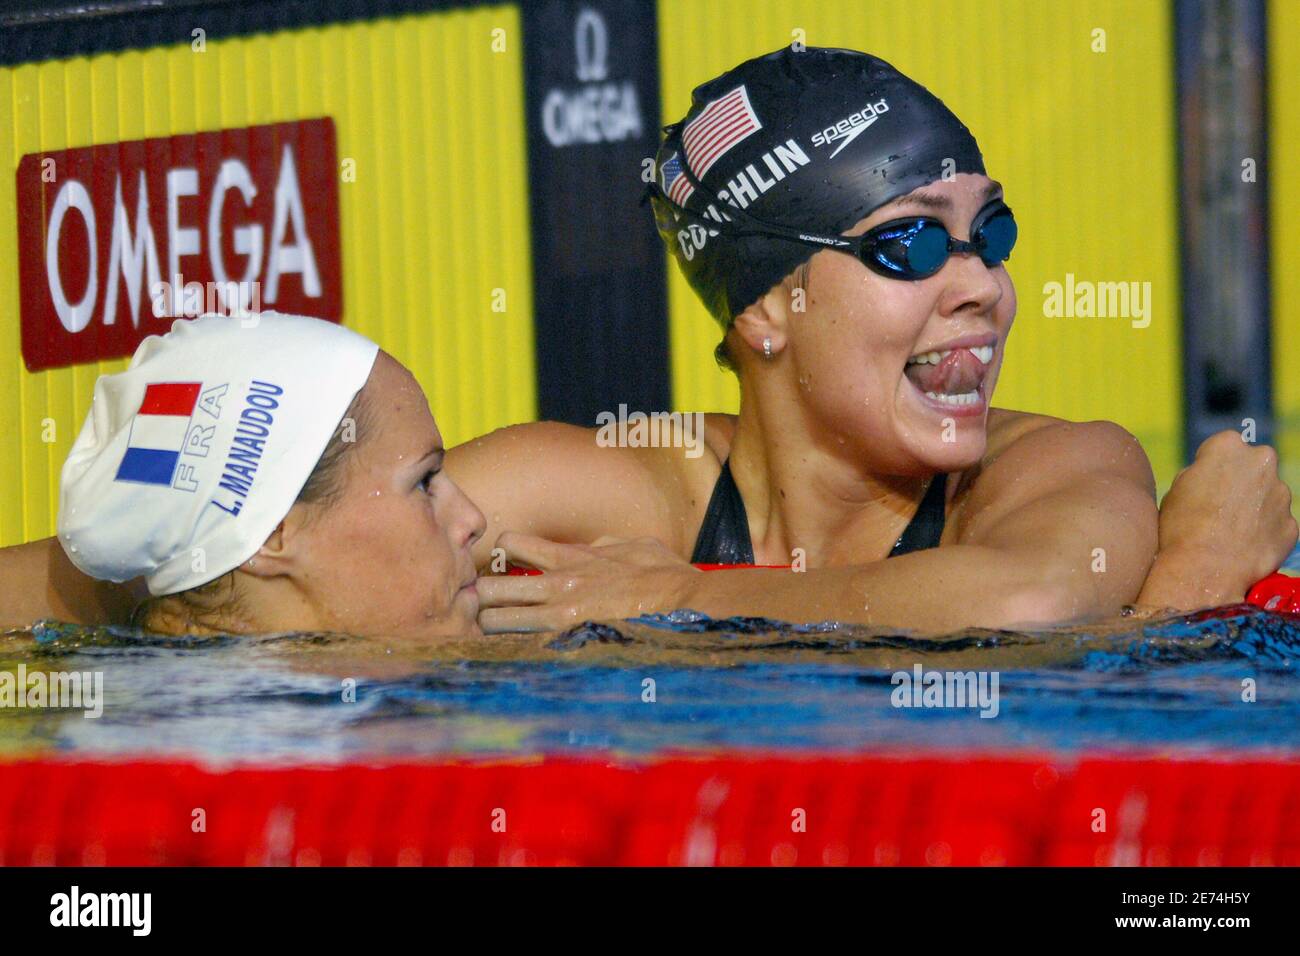 USA's Natalie Coughlin wins the gold medal and France's Laure Manaudou wins the silver on women's 100 meters backstroke during the 12th FINA World Championships, at the Rod Laver Arena, in Melbourne, Australia, on March 27, 2007. Photo by Nicolas Gouhier/Cameleon/ABACAPRESS.COM Stock Photo